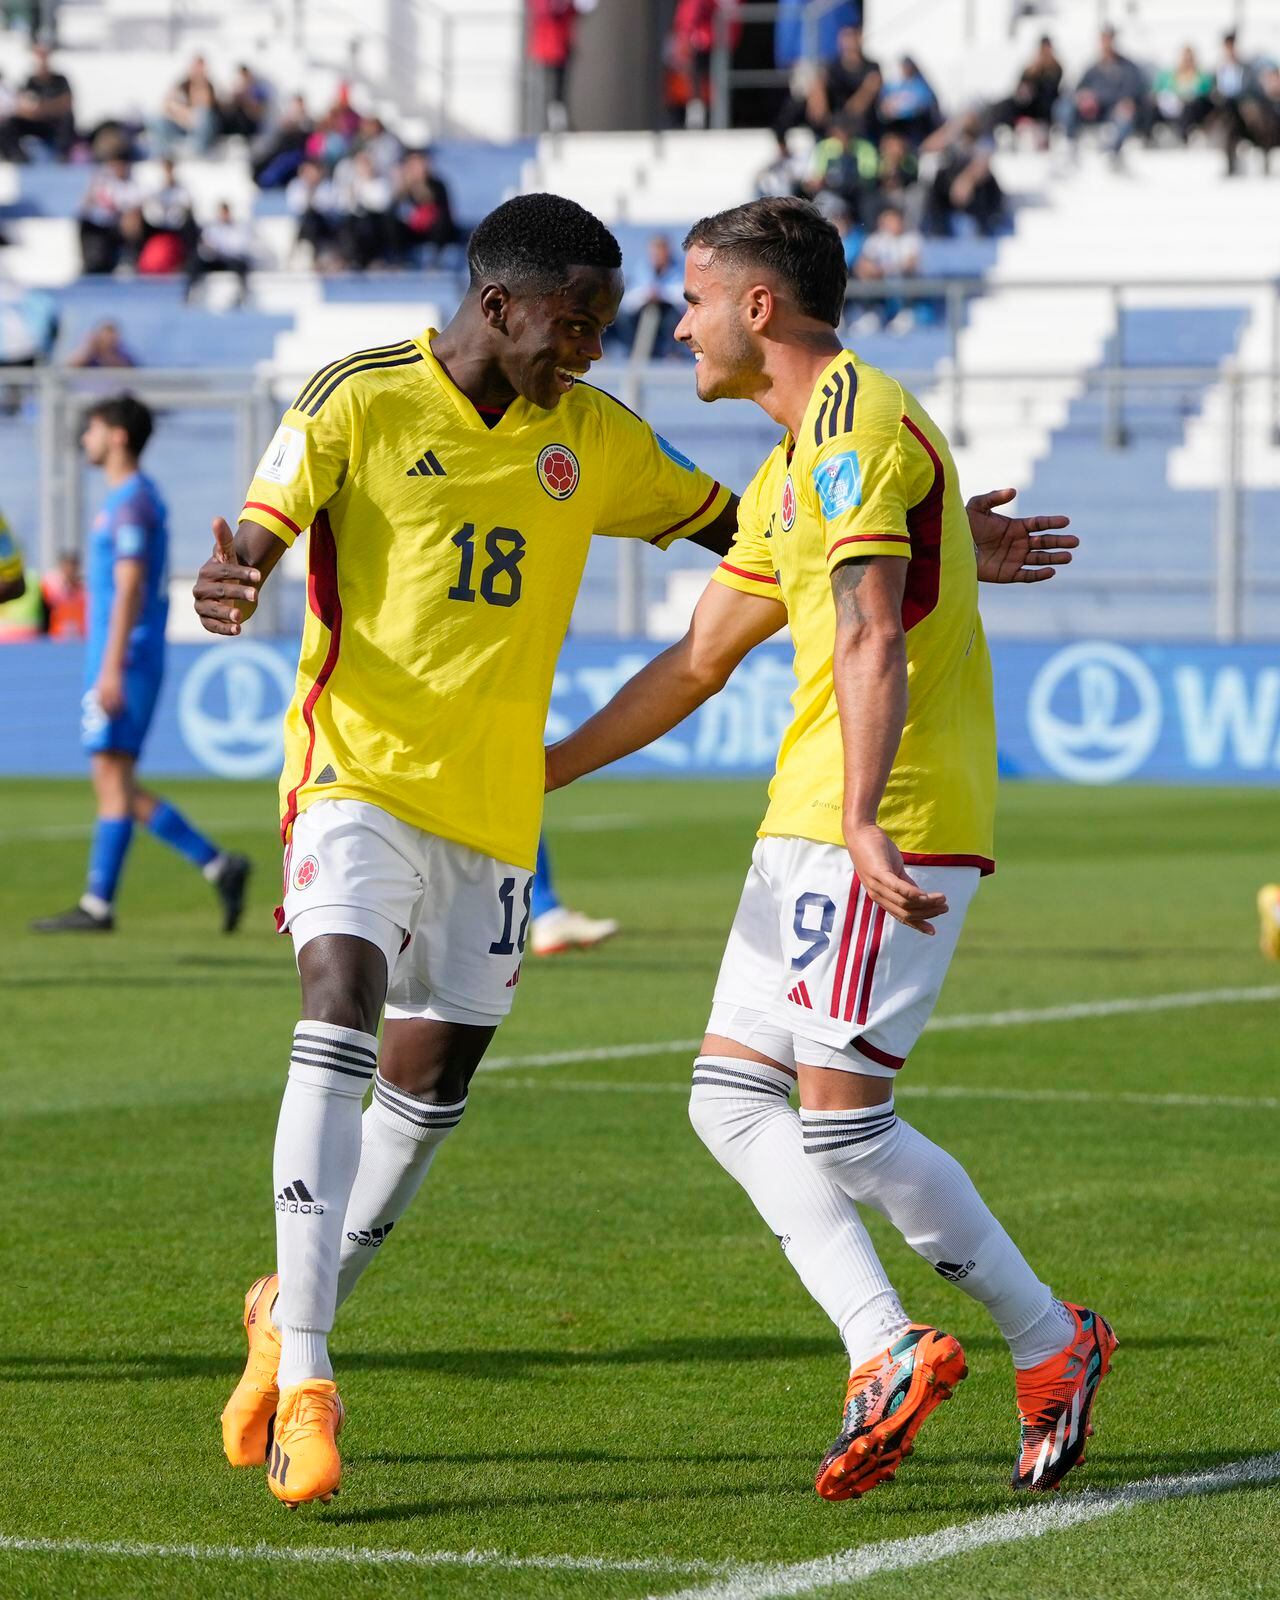 Colombia's Tomas Angel, right, is congratulated after scoring his side's 3rd goal against Slovakia during a FIFA U-20 World Cup round of 16 soccer match at the Bicentenario stadium in San Juan, Argentina, Wednesday, May 31, 2023. (AP Photo/Ricardo Mazalan)